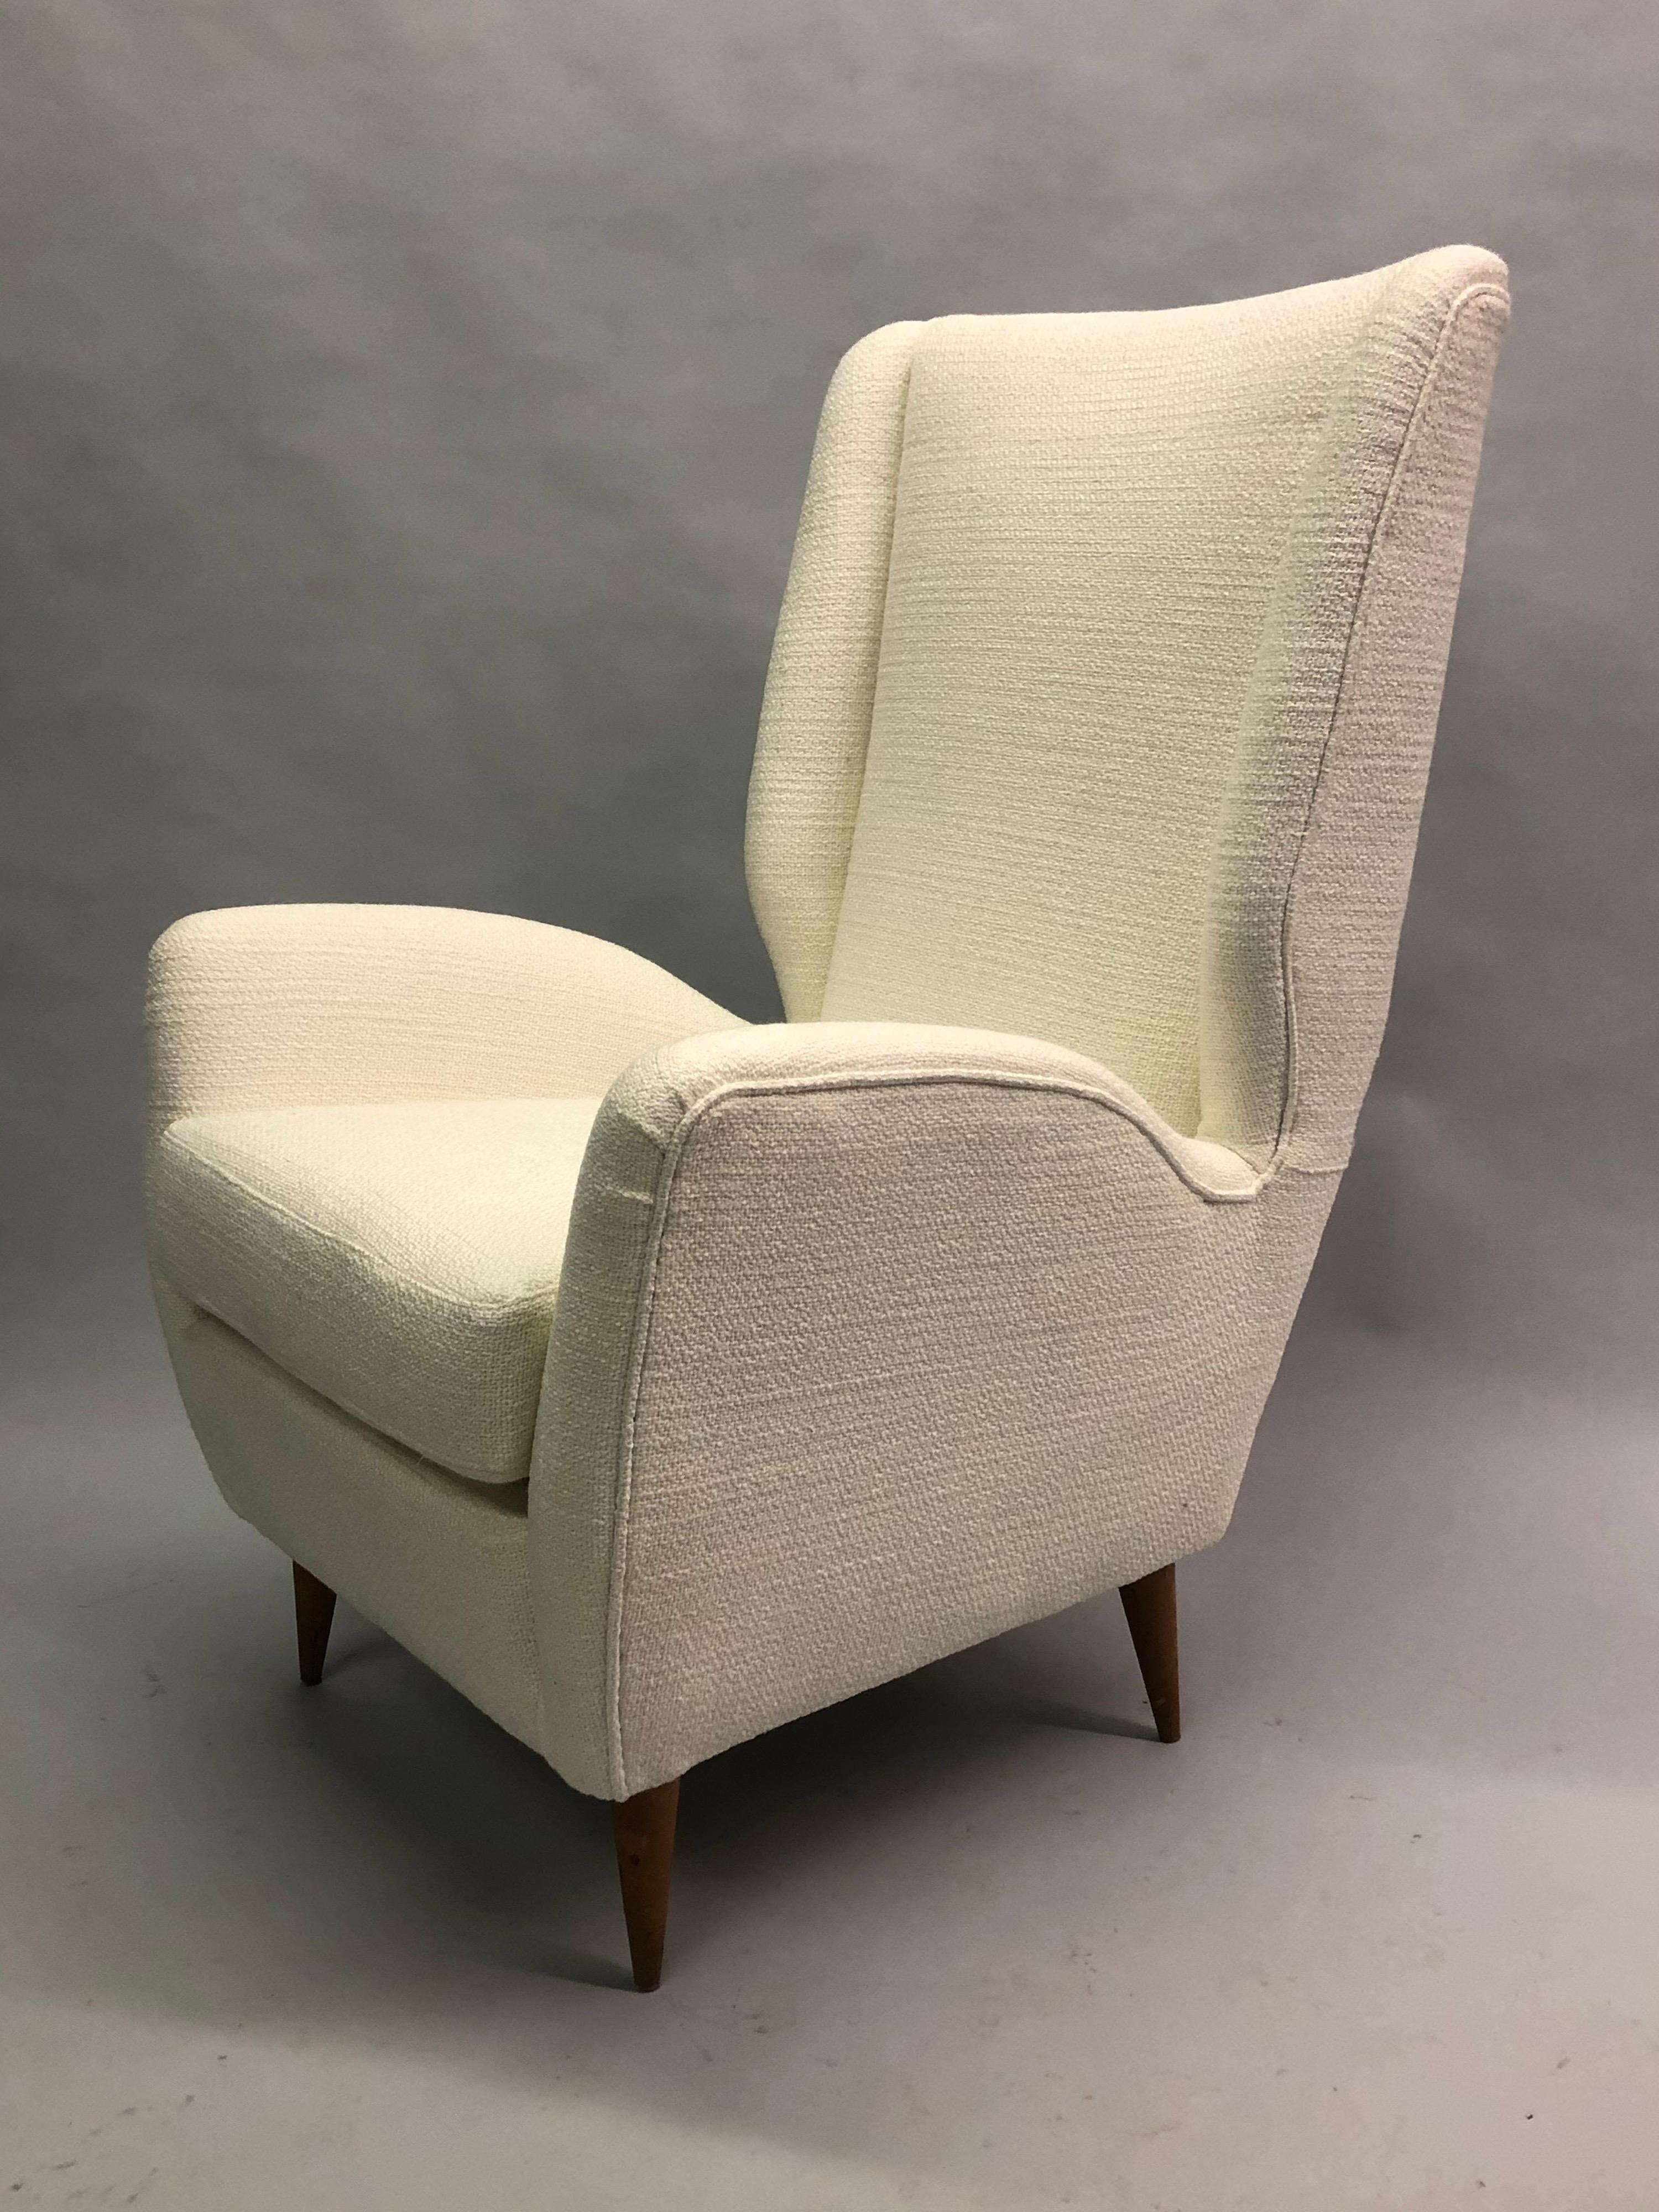 Pair of Italian Wingback Lounge Chairs / Armchairs by Gio Ponti, Model 512 1